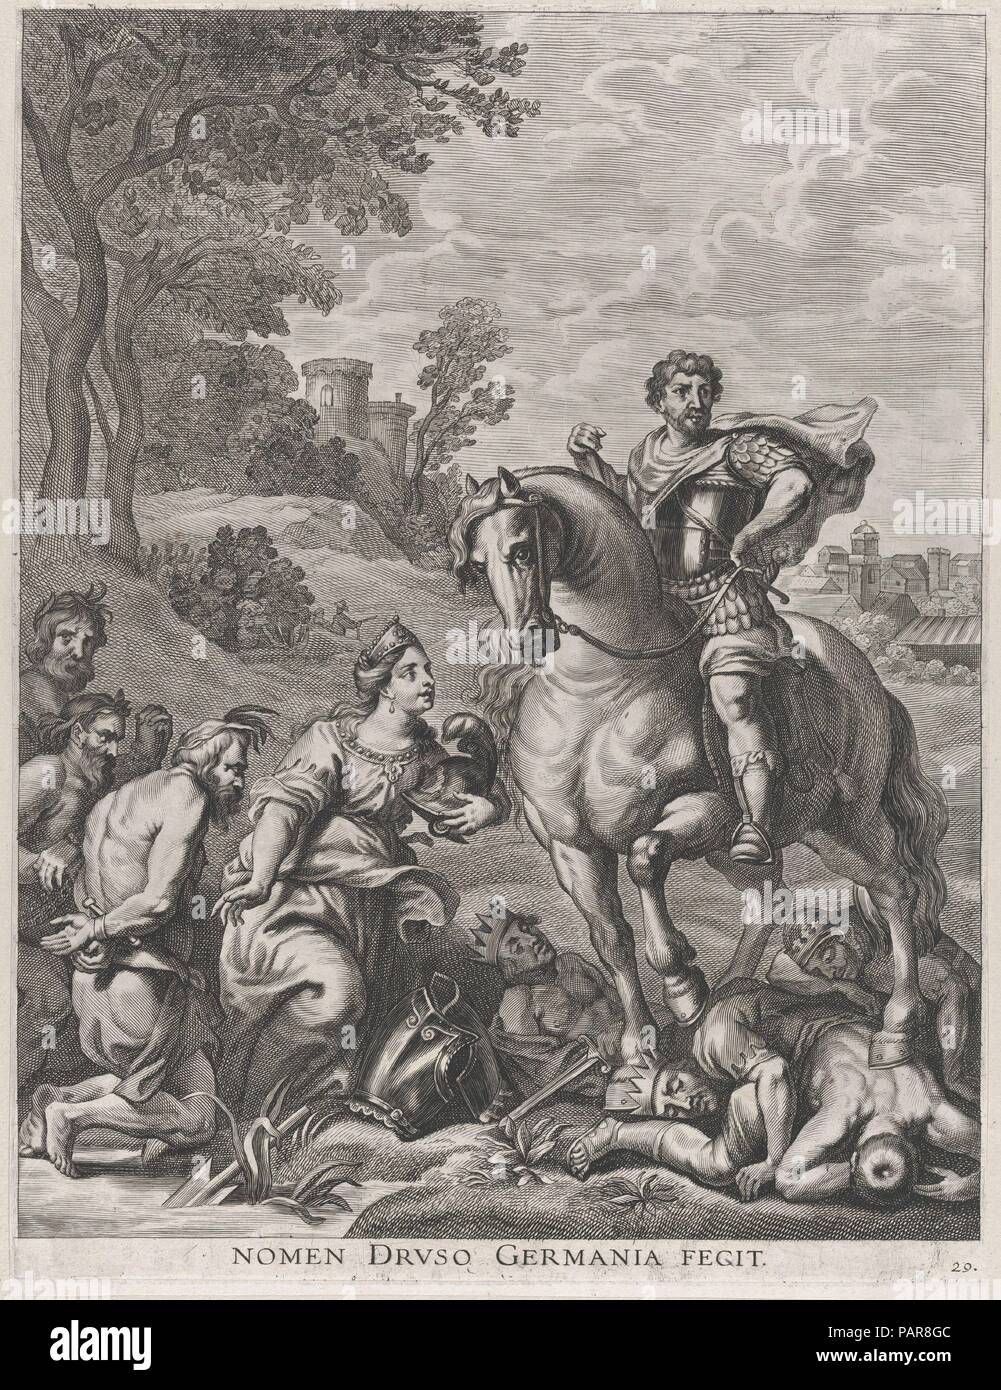 Plate 29: Germany conquered by Drusus; from Guillielmus Becanus's 'Serenissimi Principis Ferdinandi, Hispaniarum Infantis...'. Artist: Jacob Neeffs (Flemish, Antwerp 1610-after 1660 Antwerp). Dimensions: Sheet (Trimmed): 15 11/16 × 11 7/8 in. (39.8 × 30.1 cm). Published in: Antwerp. Publisher: Johannes Meursius (Flemish, active 1620-47). Date: 1636.  On January 28, 1635, the city of Ghent celebrated the entry of Cardinal-Infante Ferdinand of Spain, the recently appointed governor of the Southern Netherlands. A group of Flemish artists were commissioned to create paintings for the decoration of Stock Photo